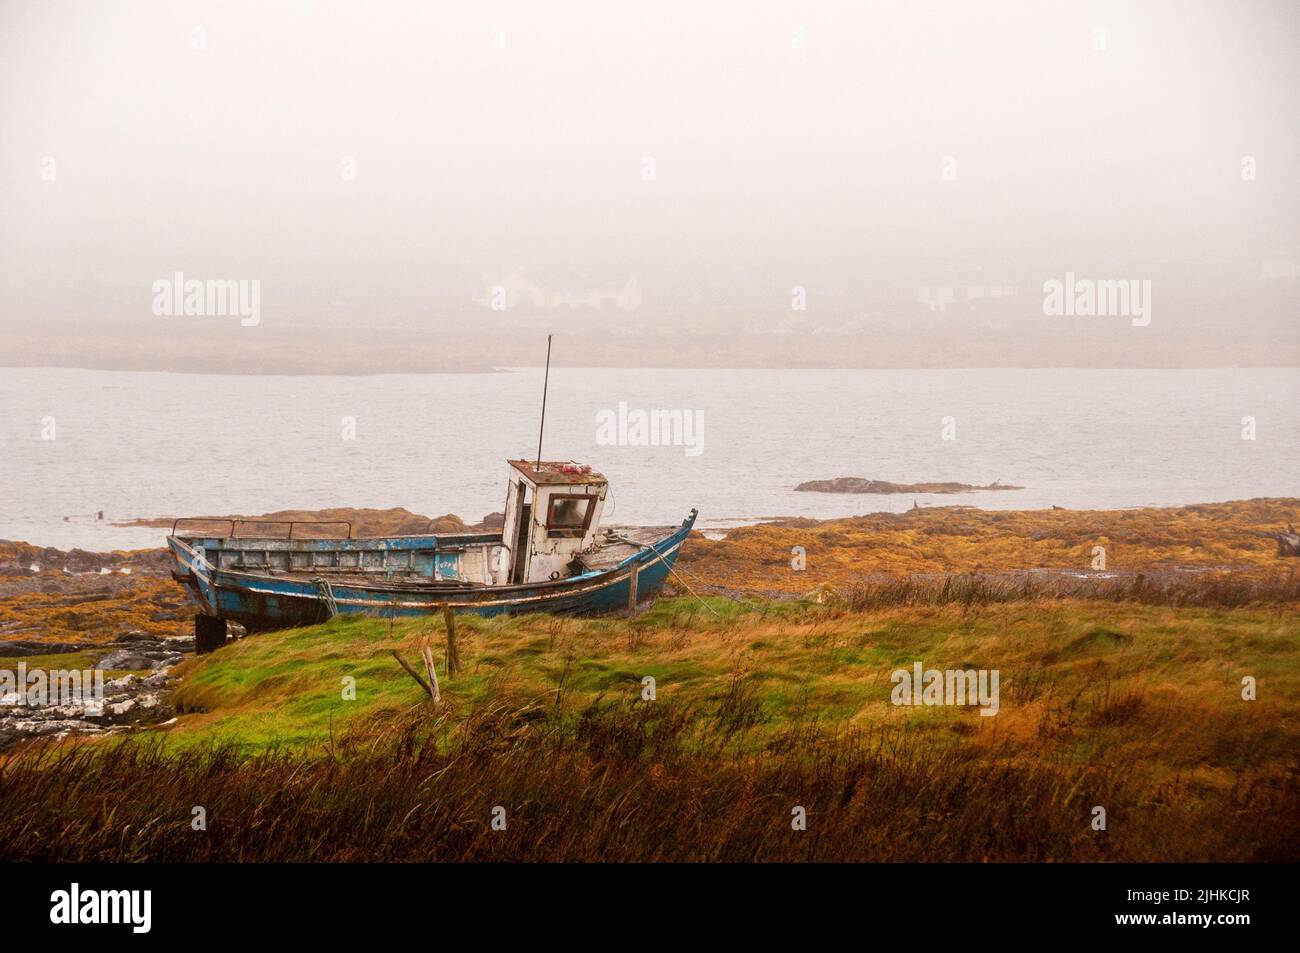 https://c8.alamy.com/comp/2JHKCJR/old-fishing-boat-during-low-tide-in-the-wetlands-of-the-connemara-region-of-western-ireland-2JHKCJR.jpg